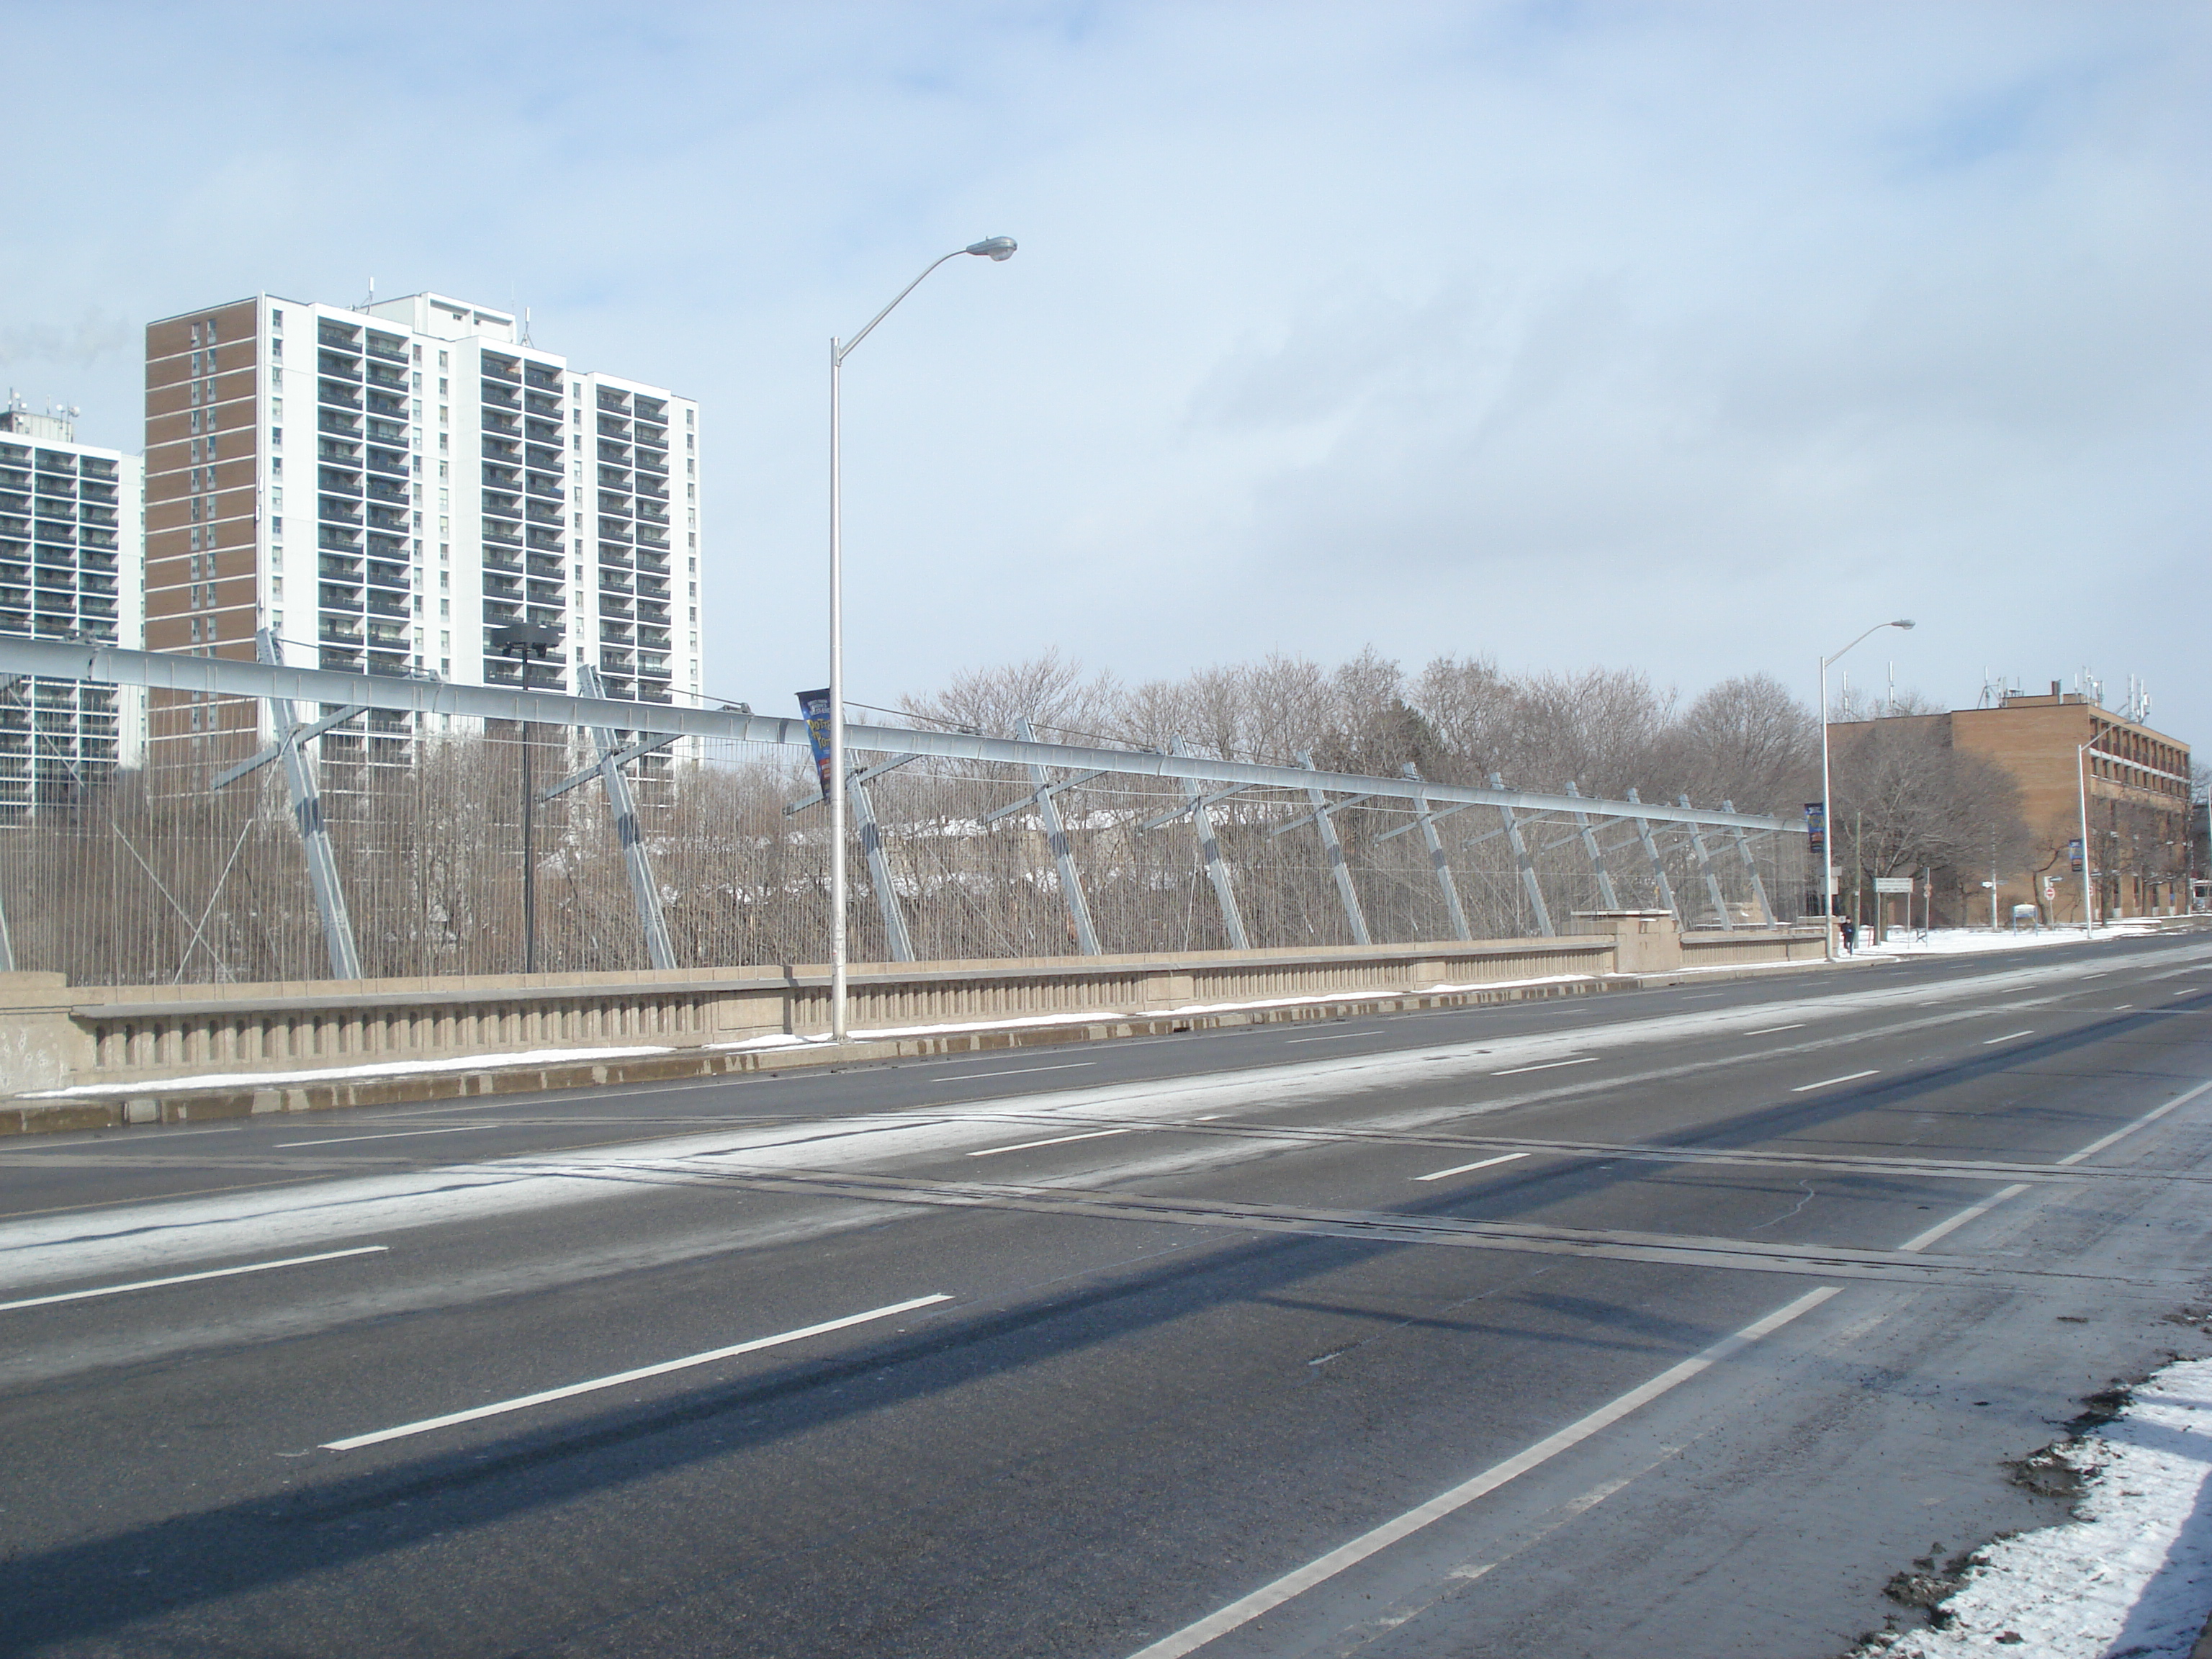 The Bloor Street Bridge in 2012, with suicide barrier dating from 2003.